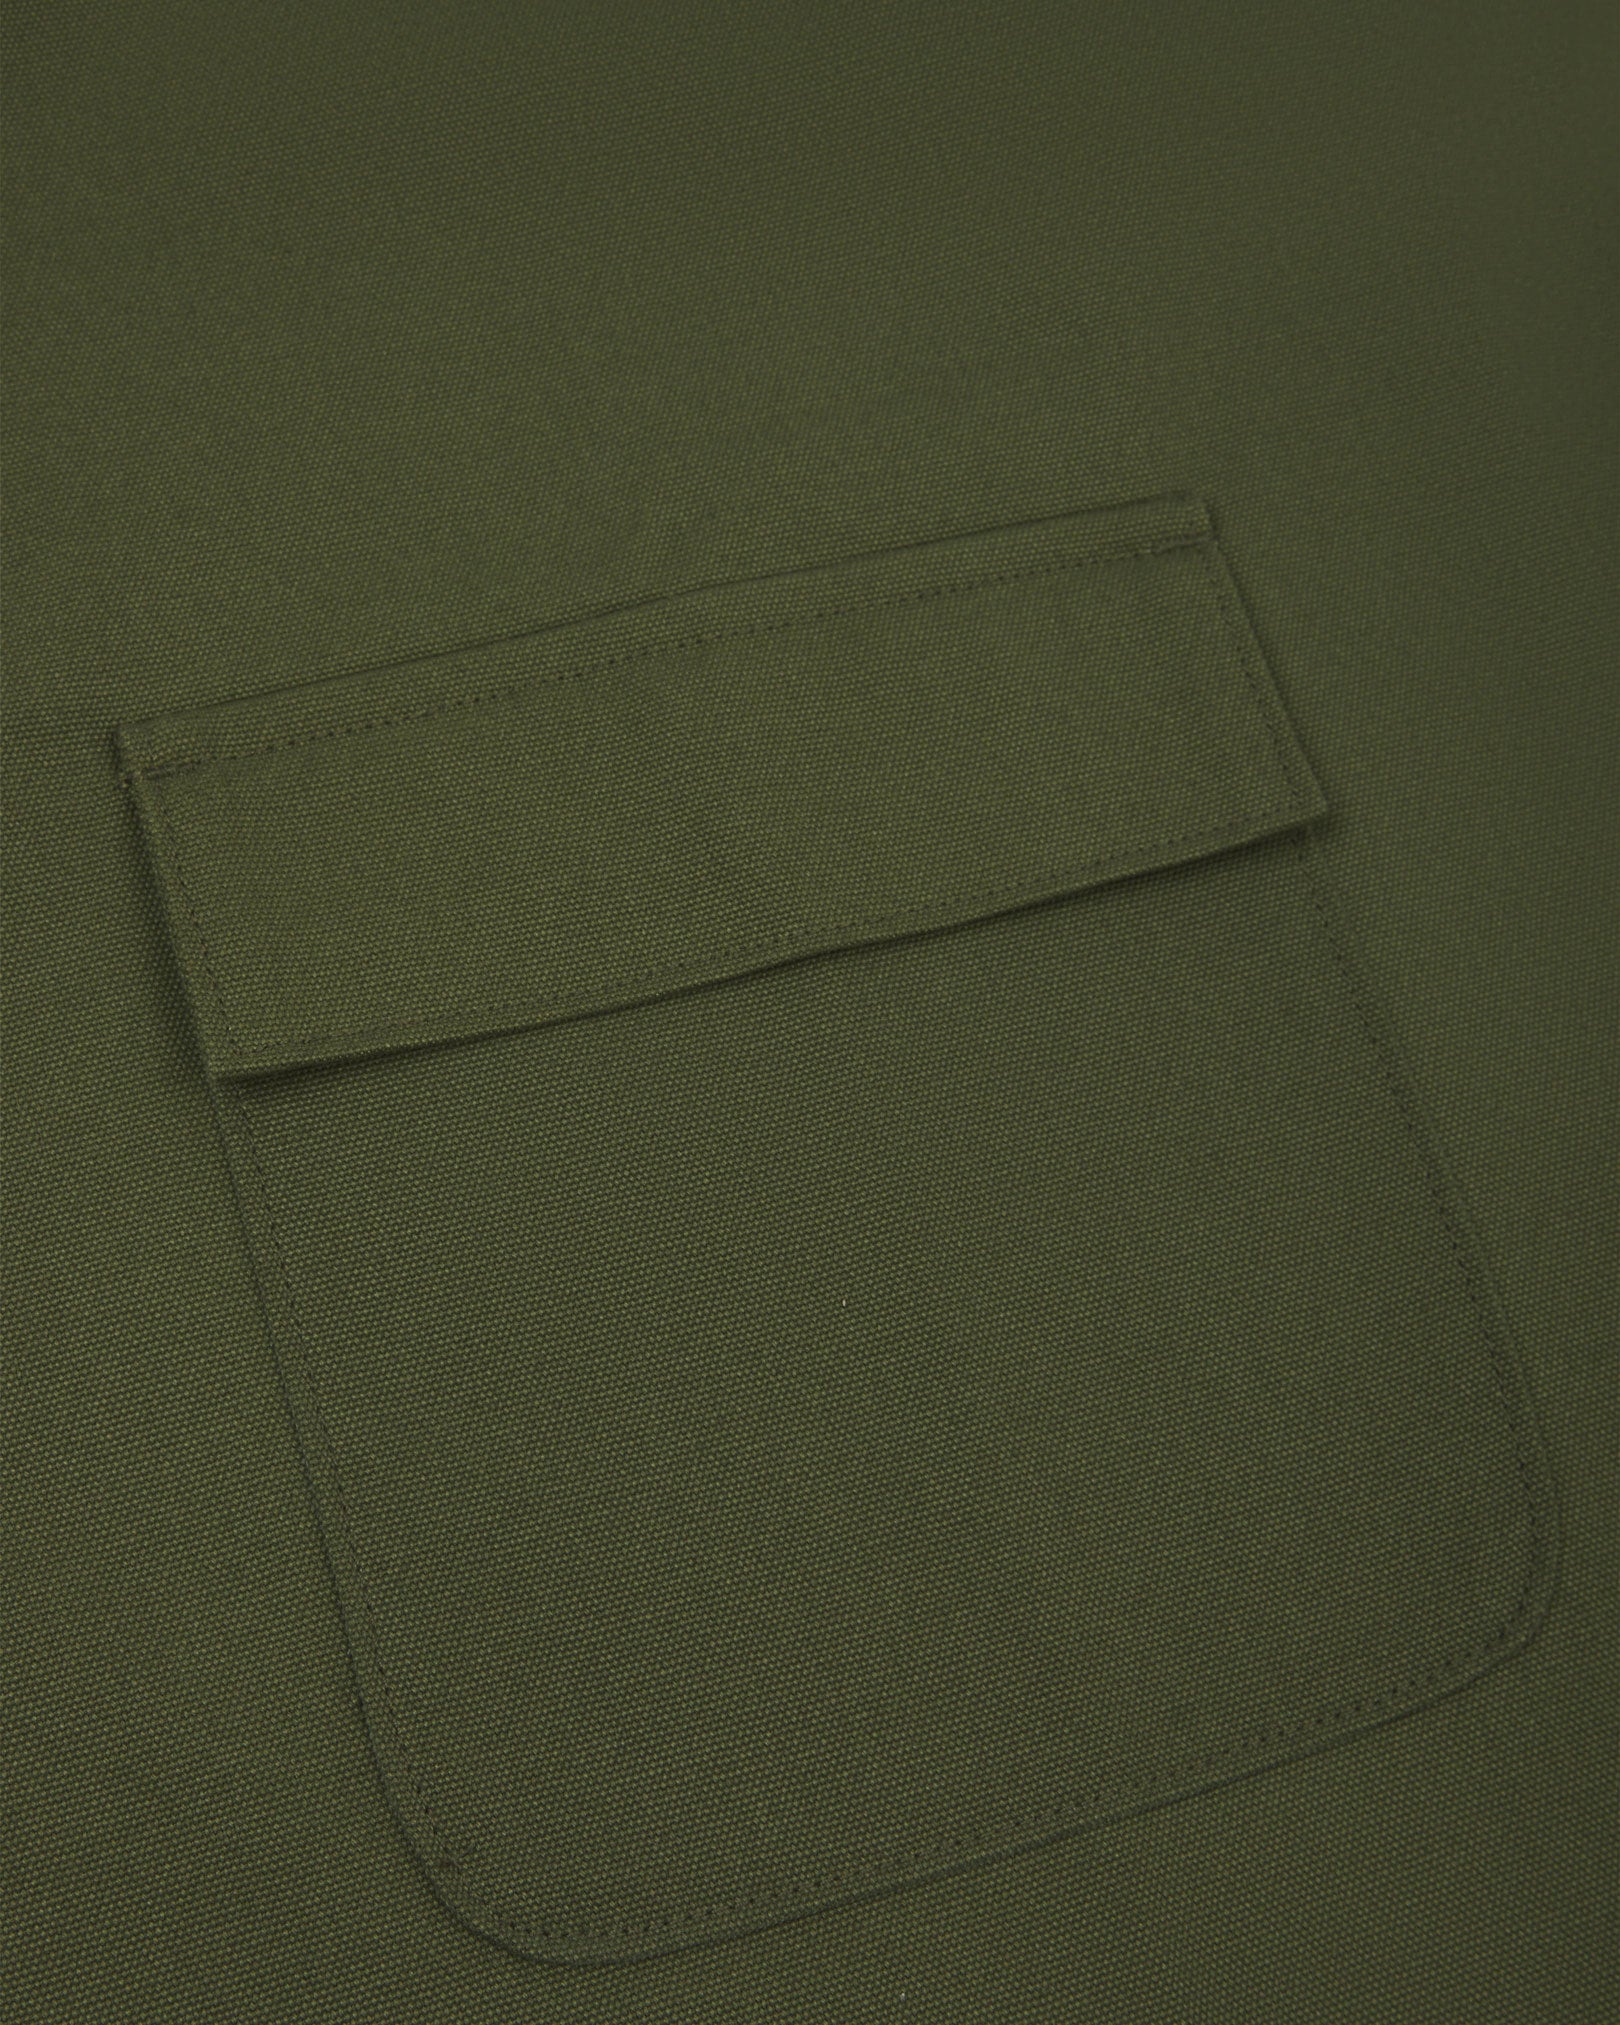 Close up shot of Uskees green canvas apron showing front flap pocket.